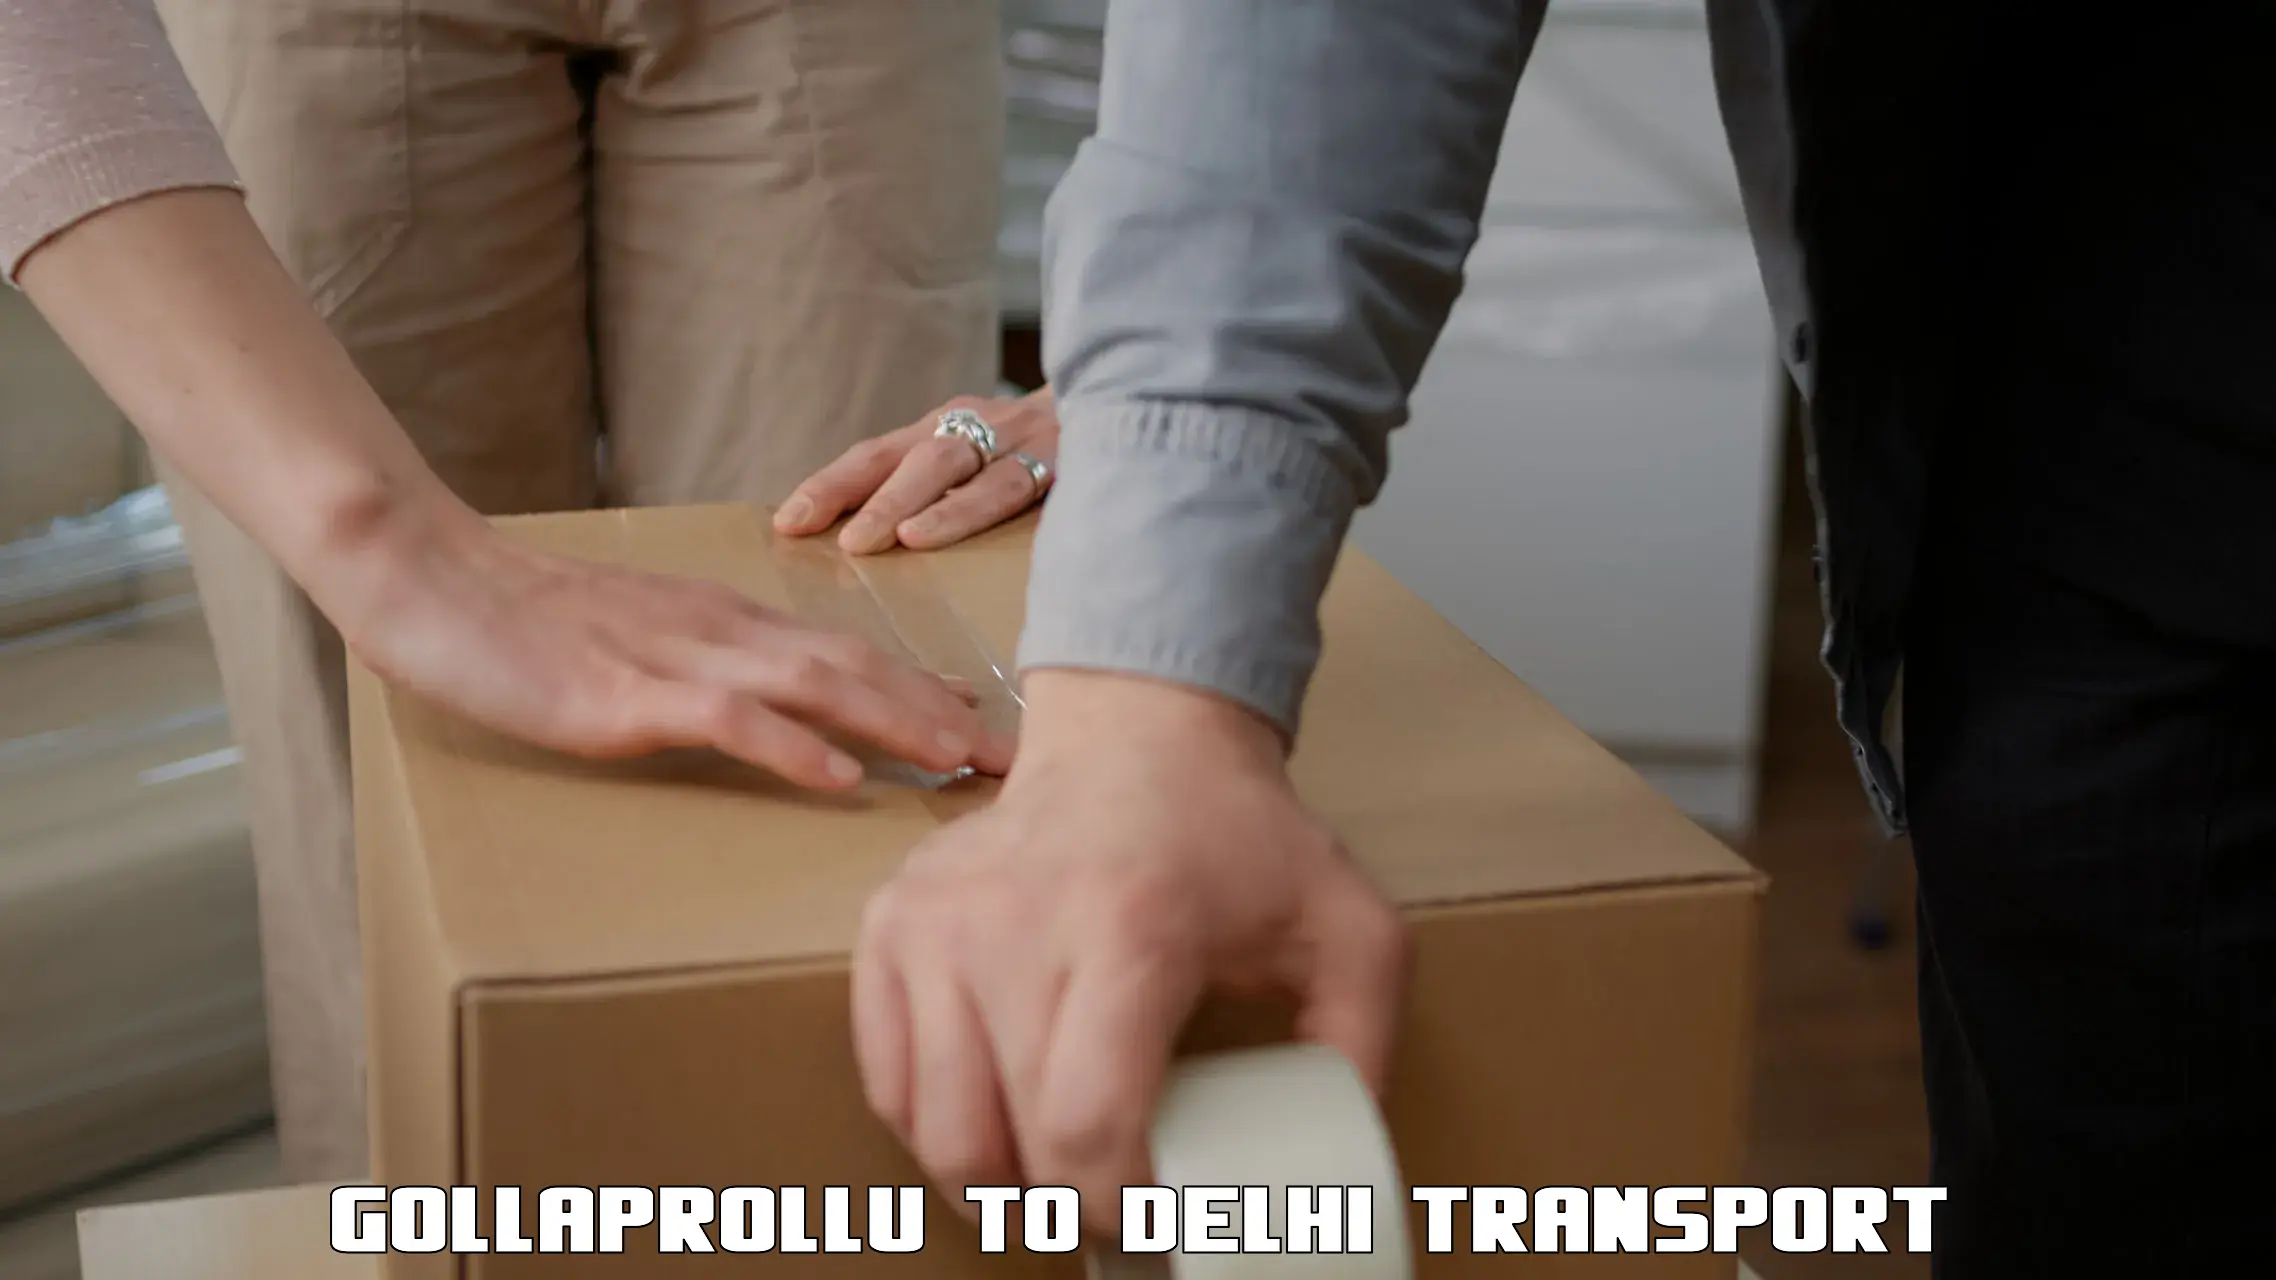 Shipping services Gollaprollu to East Delhi